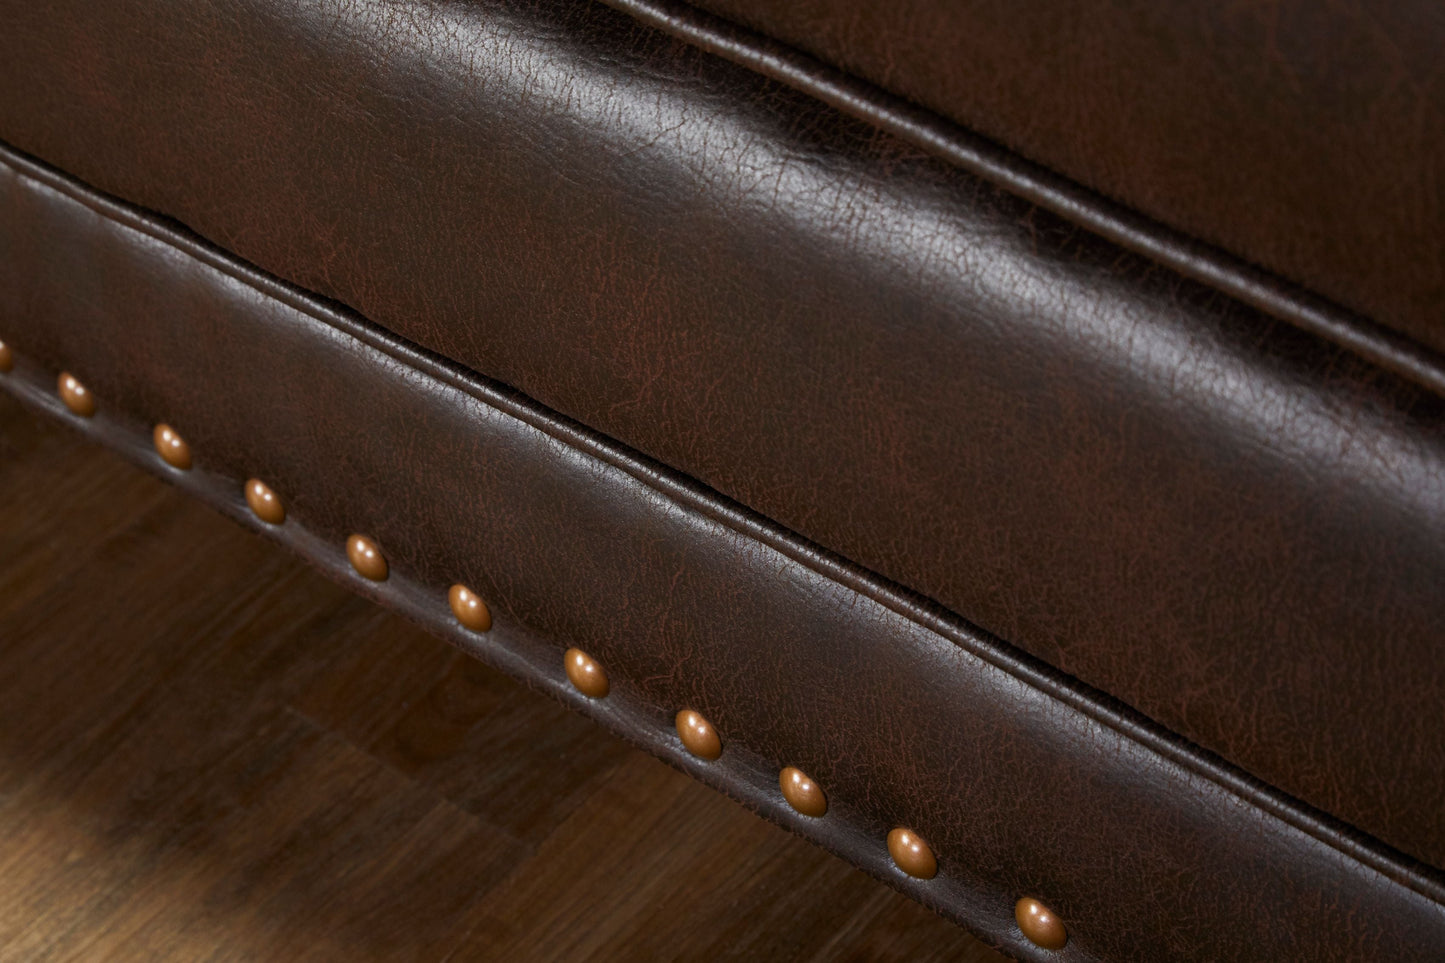 Leinster Faux Leather Upholstered Nailhead Loveseat in Espresso